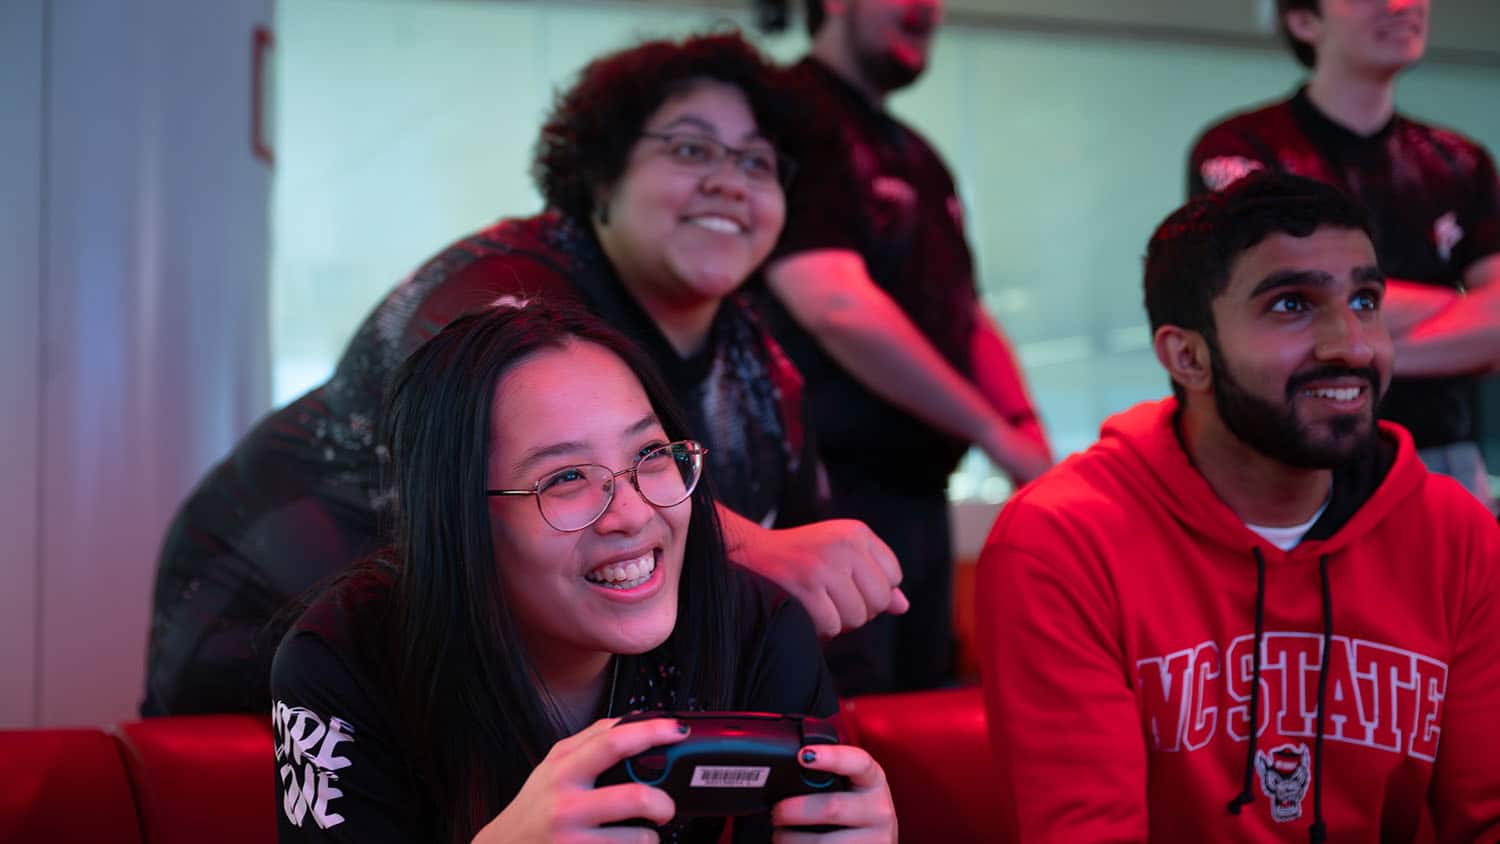 A shot of three students gaming, smiling and celebrating together.